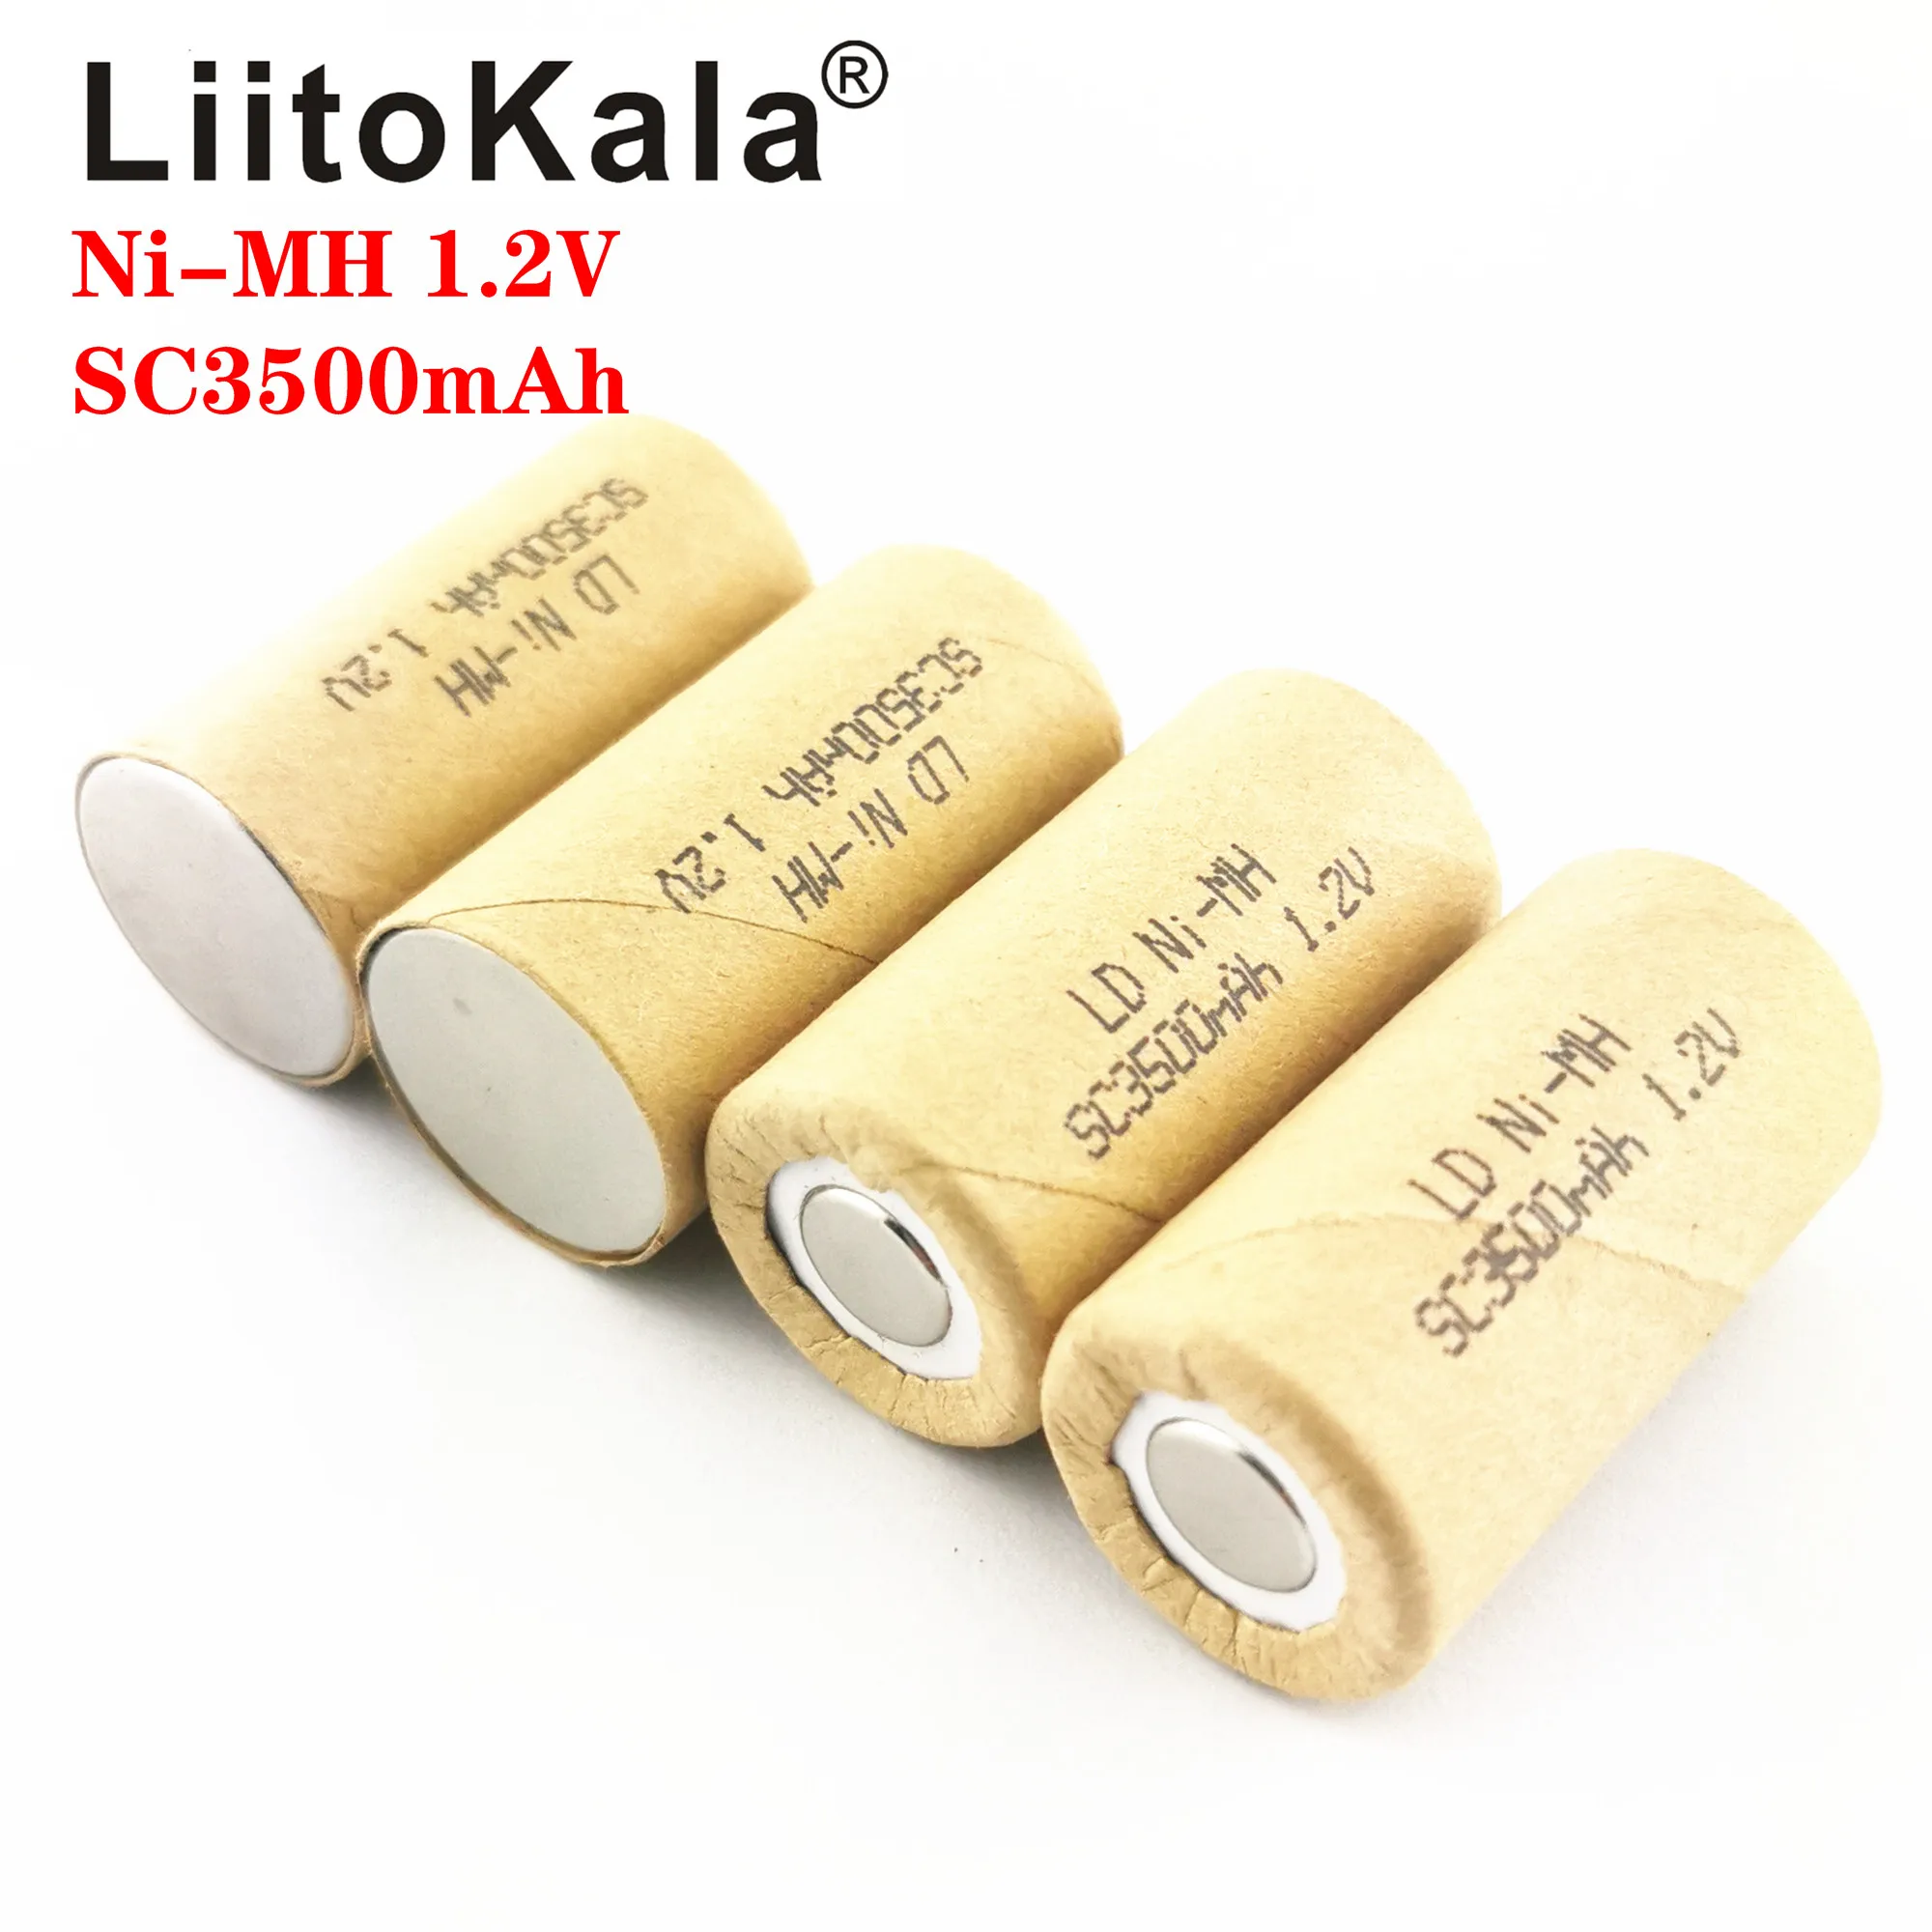 

2023 LiitoKala SC 3500mAh 3000mAH NI-MH 1.2V Rechargeable Battery high discharge rate 10C 15C for Electric tools Power Tool